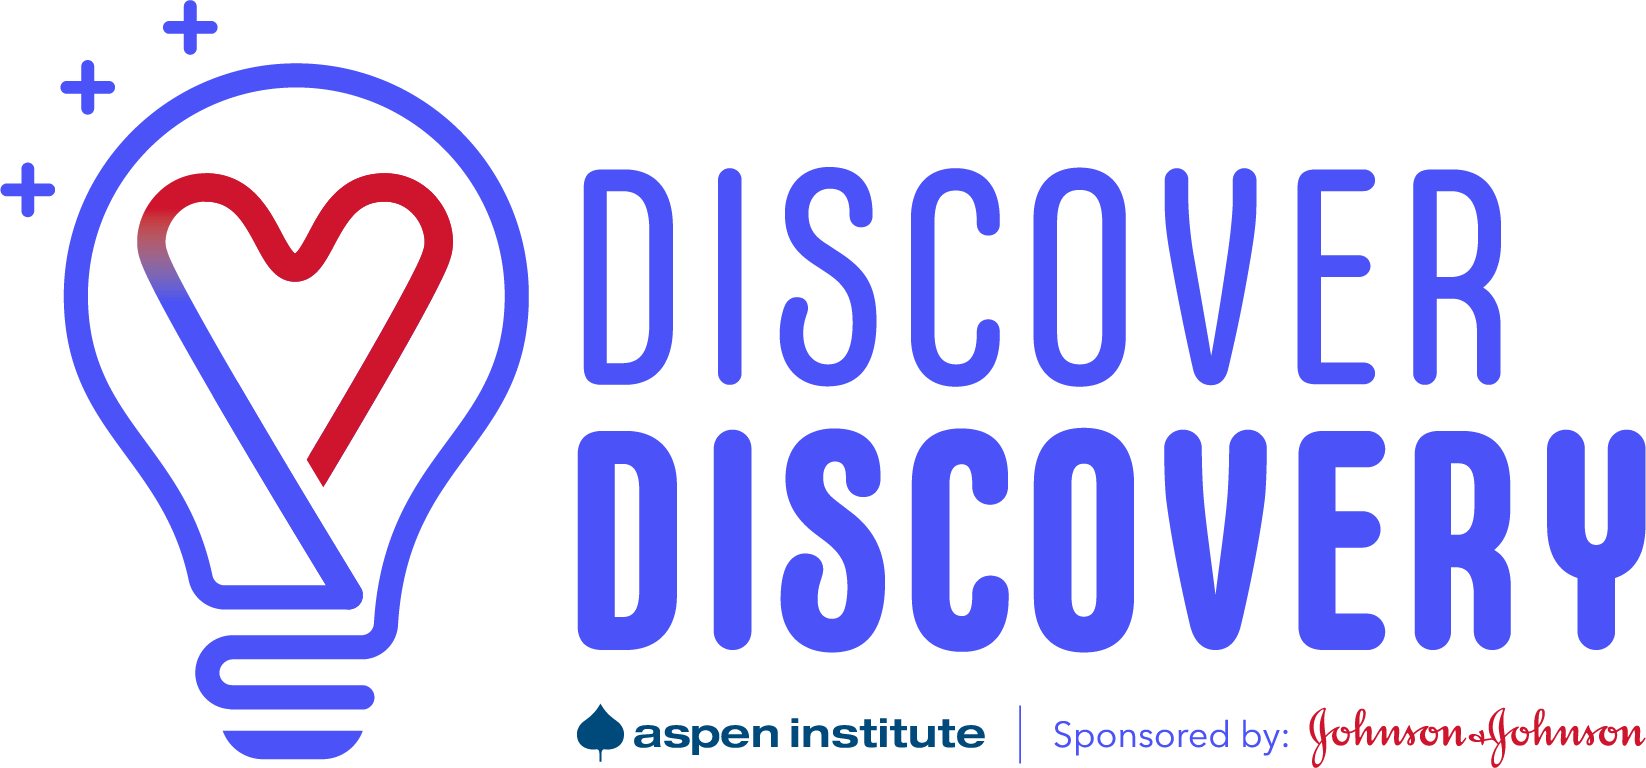 Discover Discovery